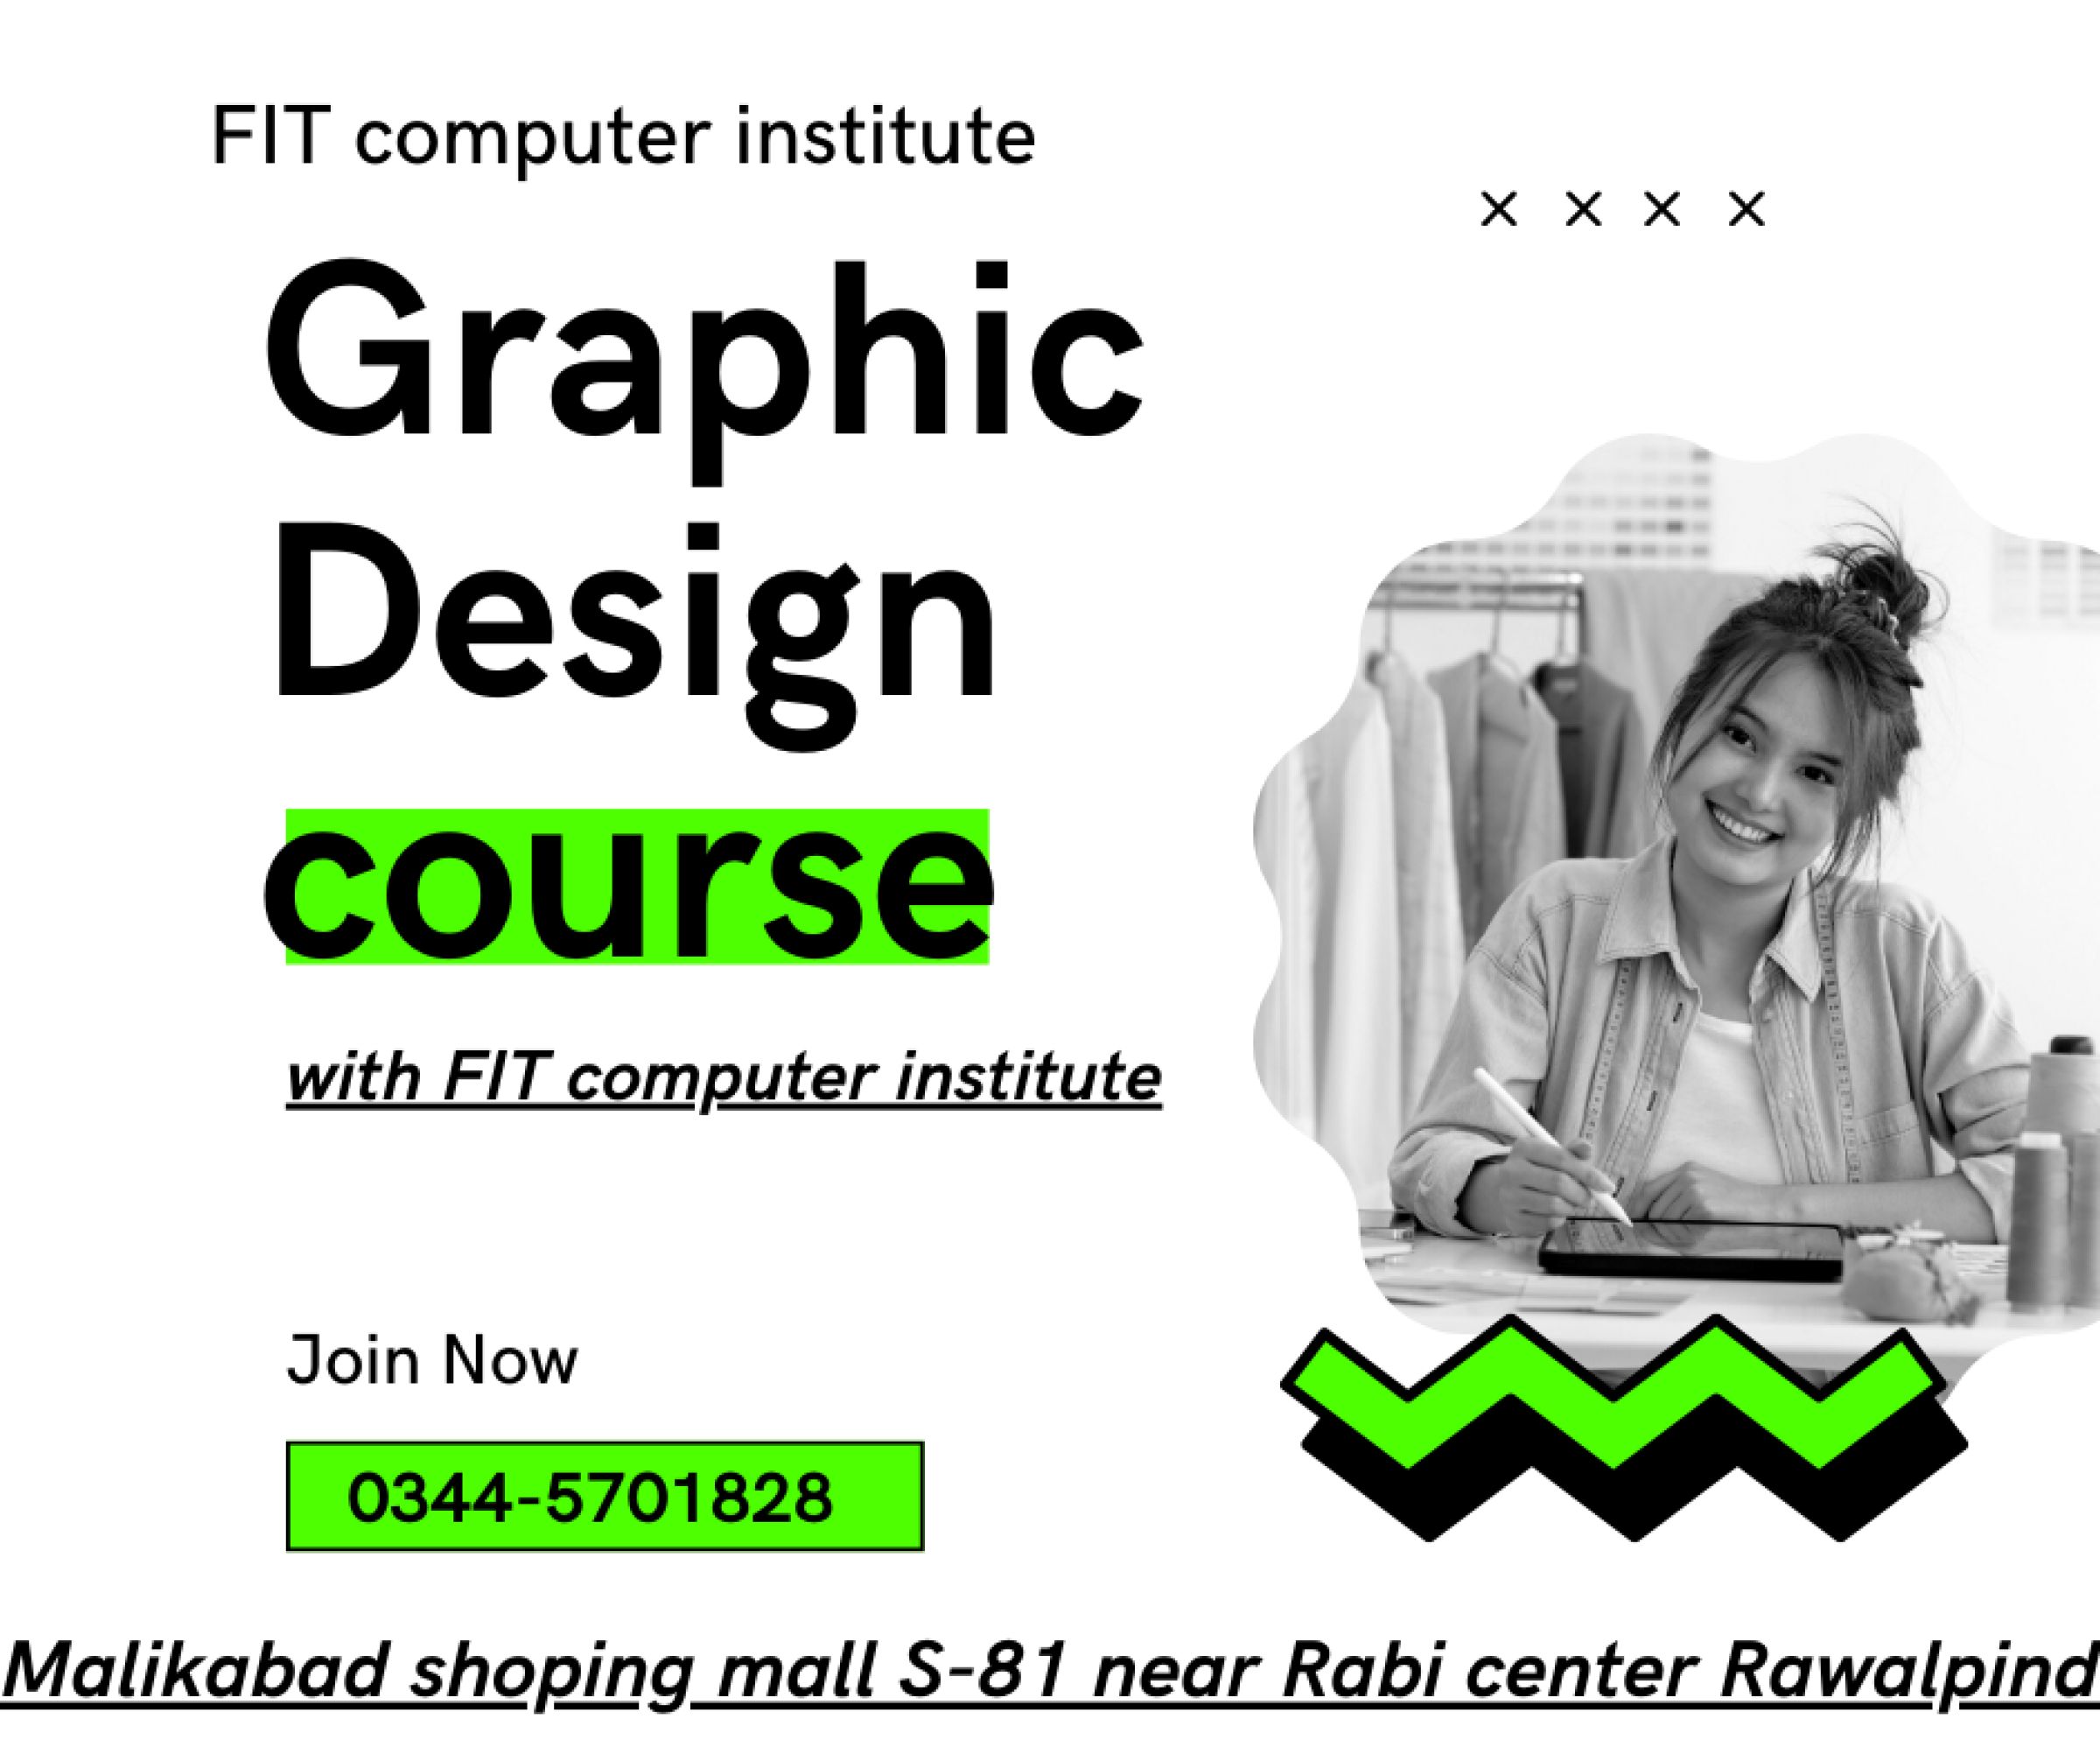 Graphic designing course by FIT